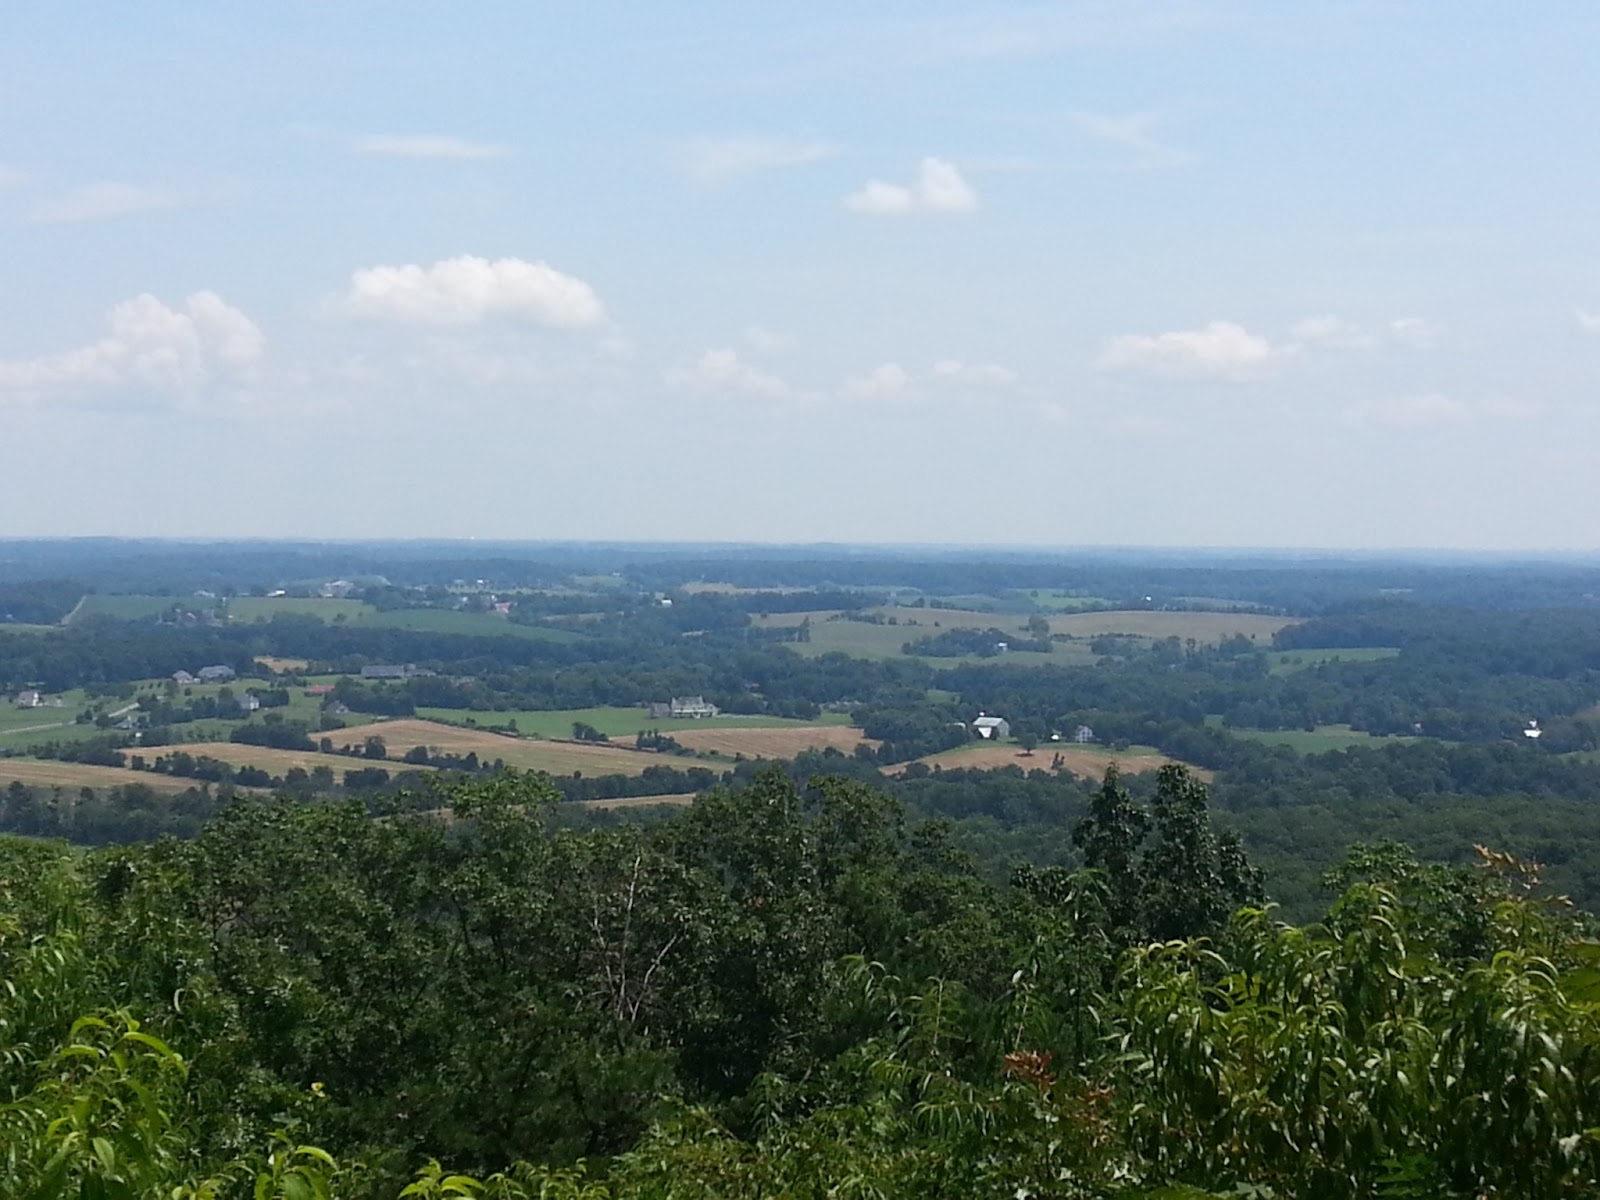 Been There, Done That!: SugarLoaf Mountain Park